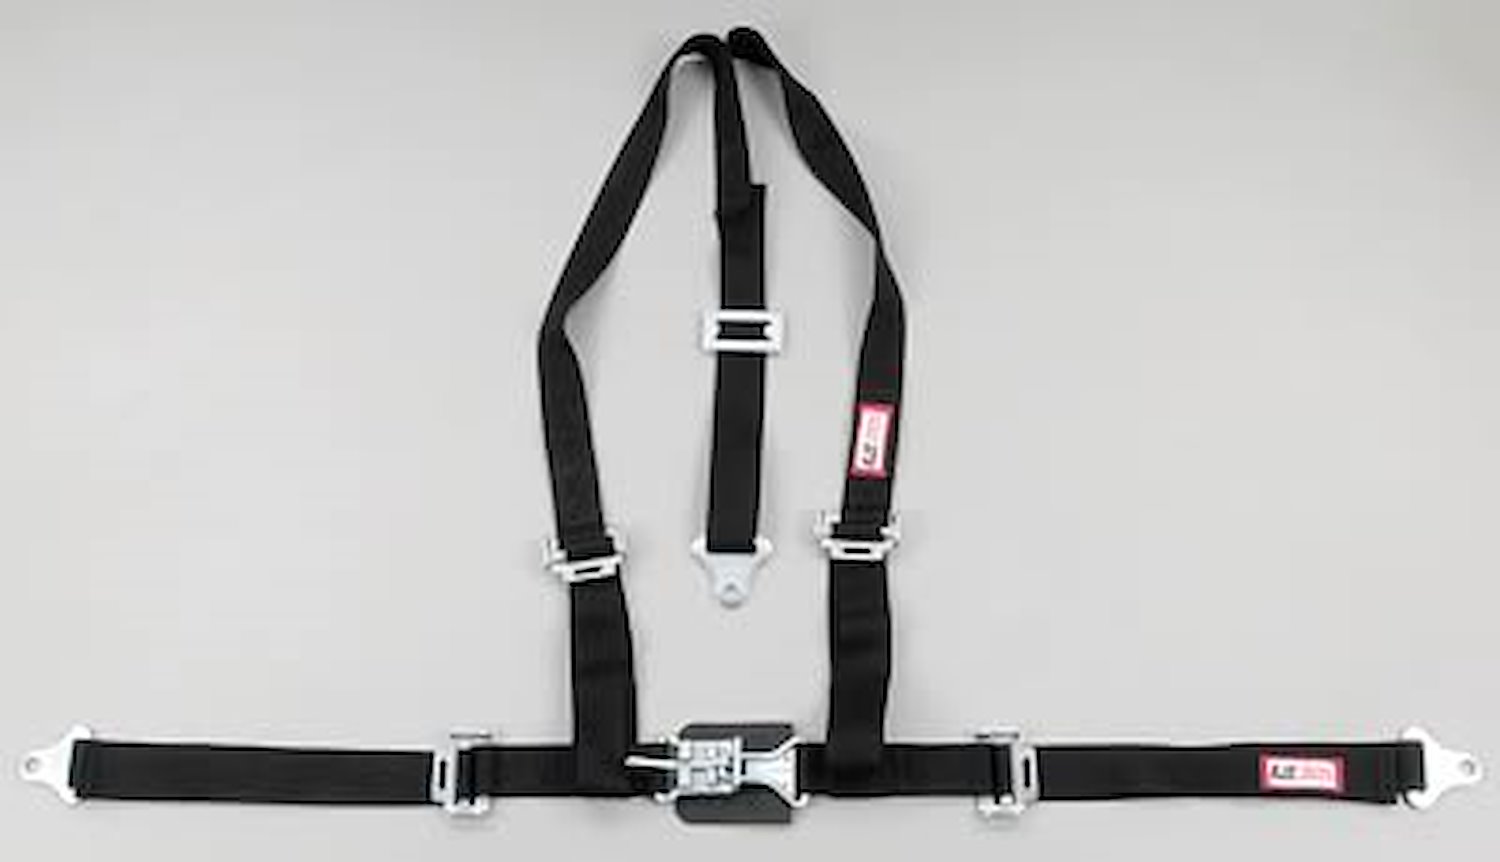 NON-SFI L&L HARNESS 3 PULL UP Lap Belt SNAP SEWN IN 2 S.H. Individual FLOOR Mount WRAP/SNAP BLUE